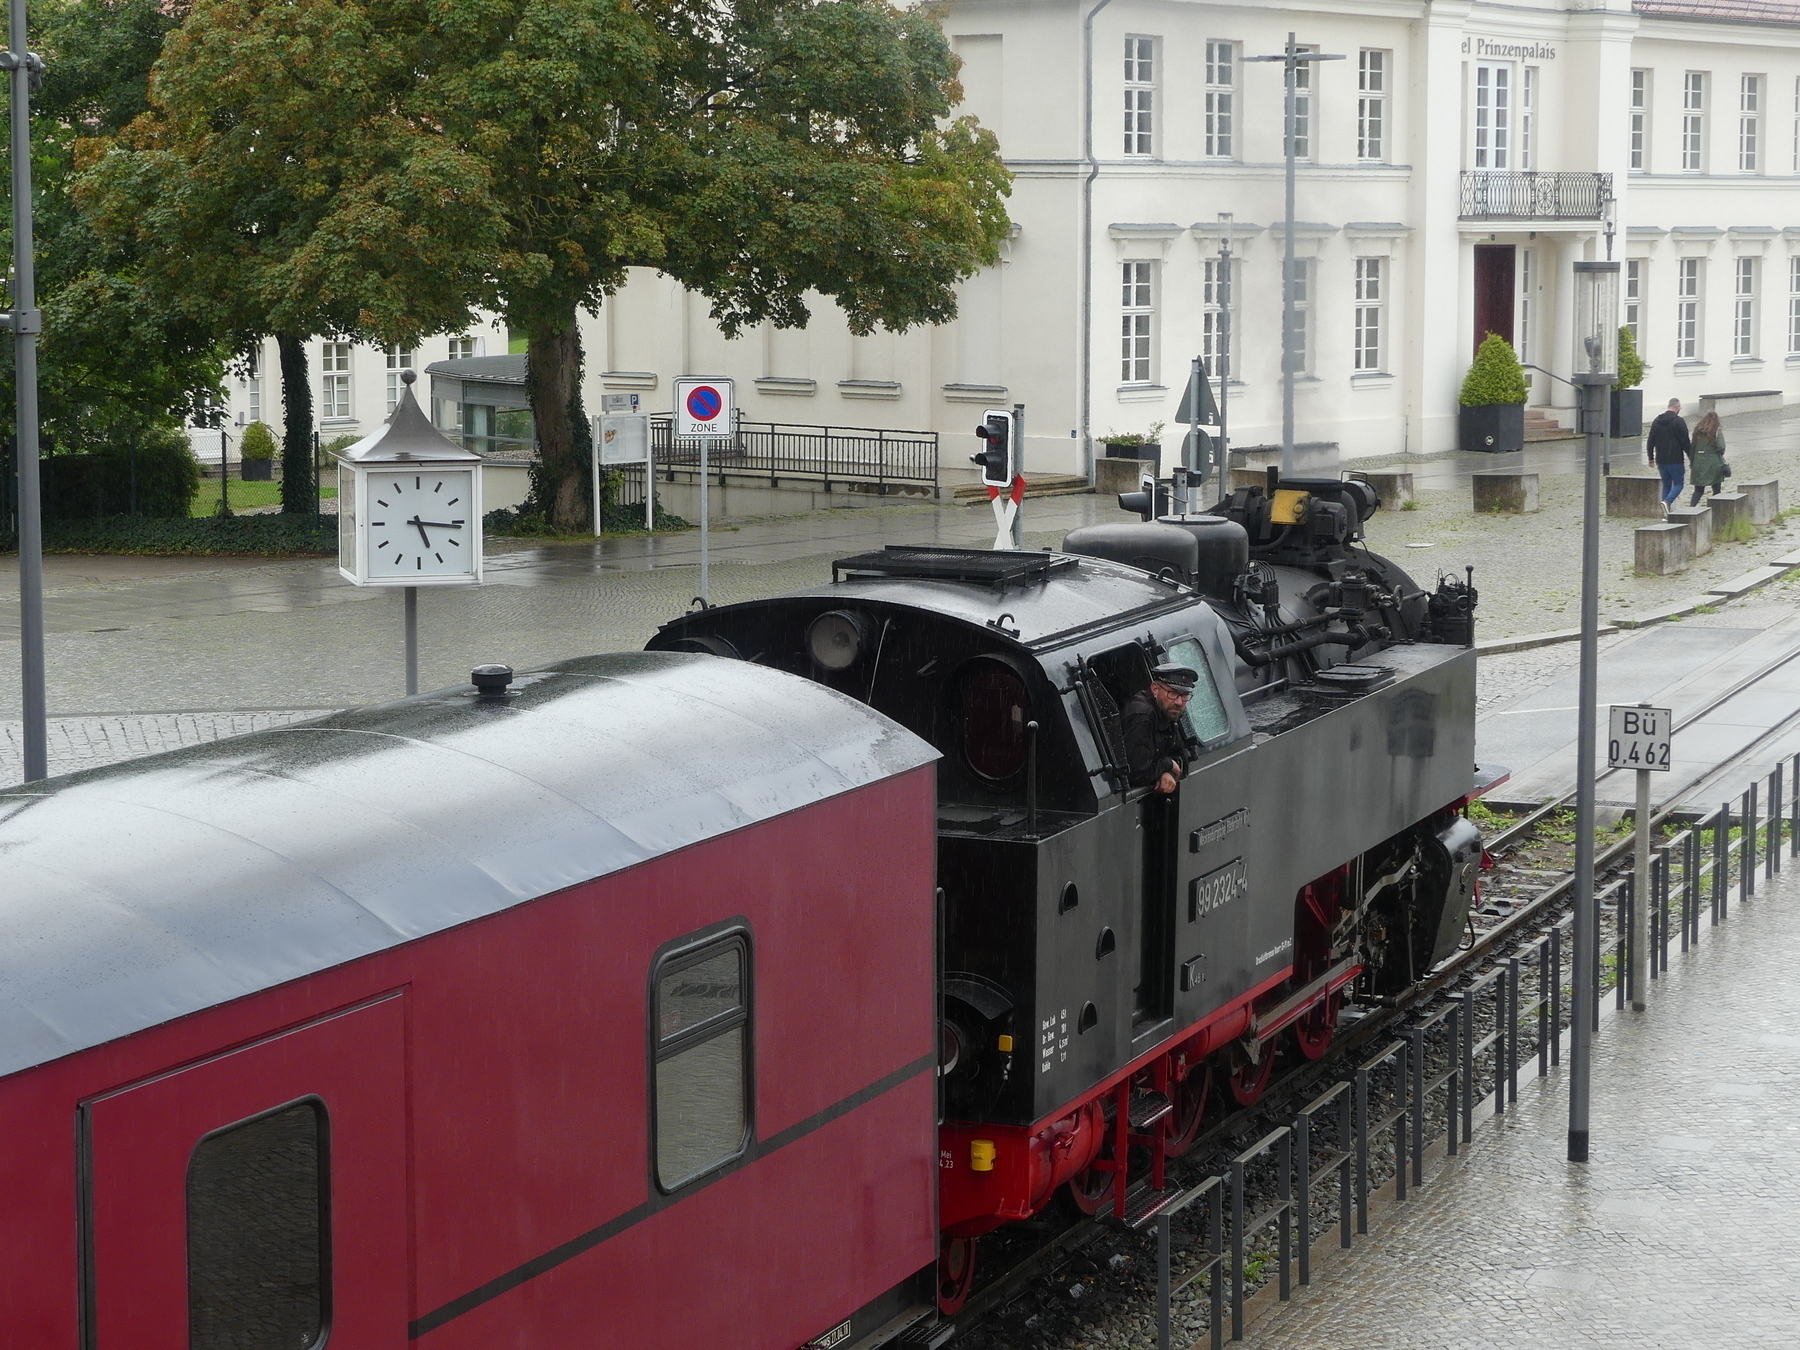 An old steam train in a rainy city center